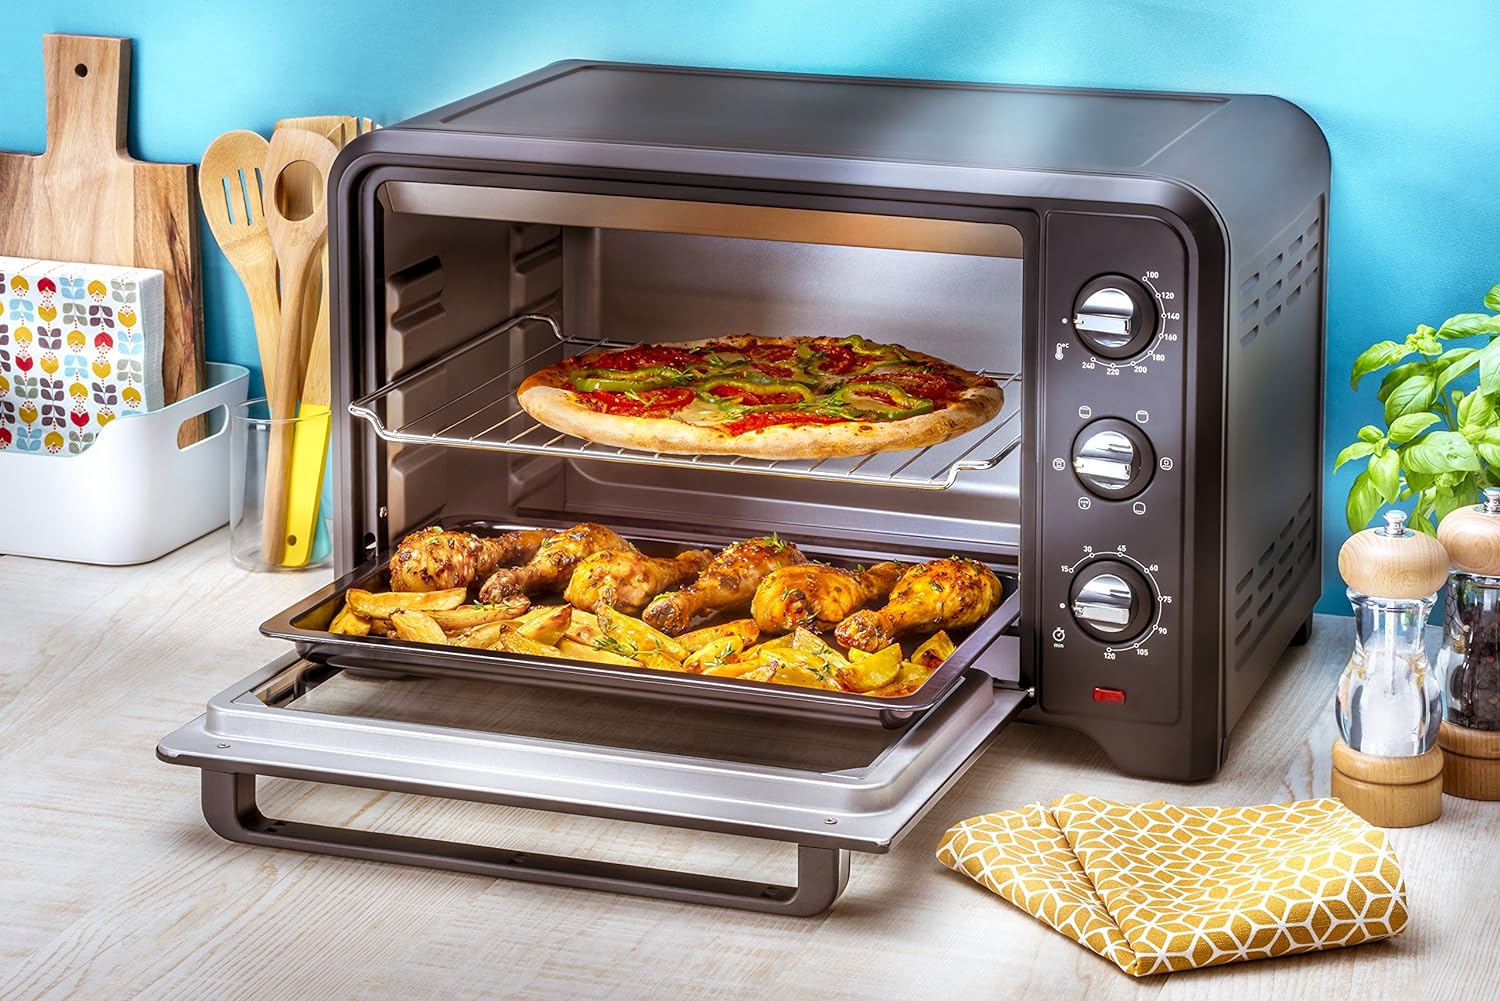 Tefal OF445840 Optimo Mini Oven, 19 Litre Capacity, With Rotisserie, Stainless Steel, Black, 1380W, 46.2 x 31.8 x 22.8 cm